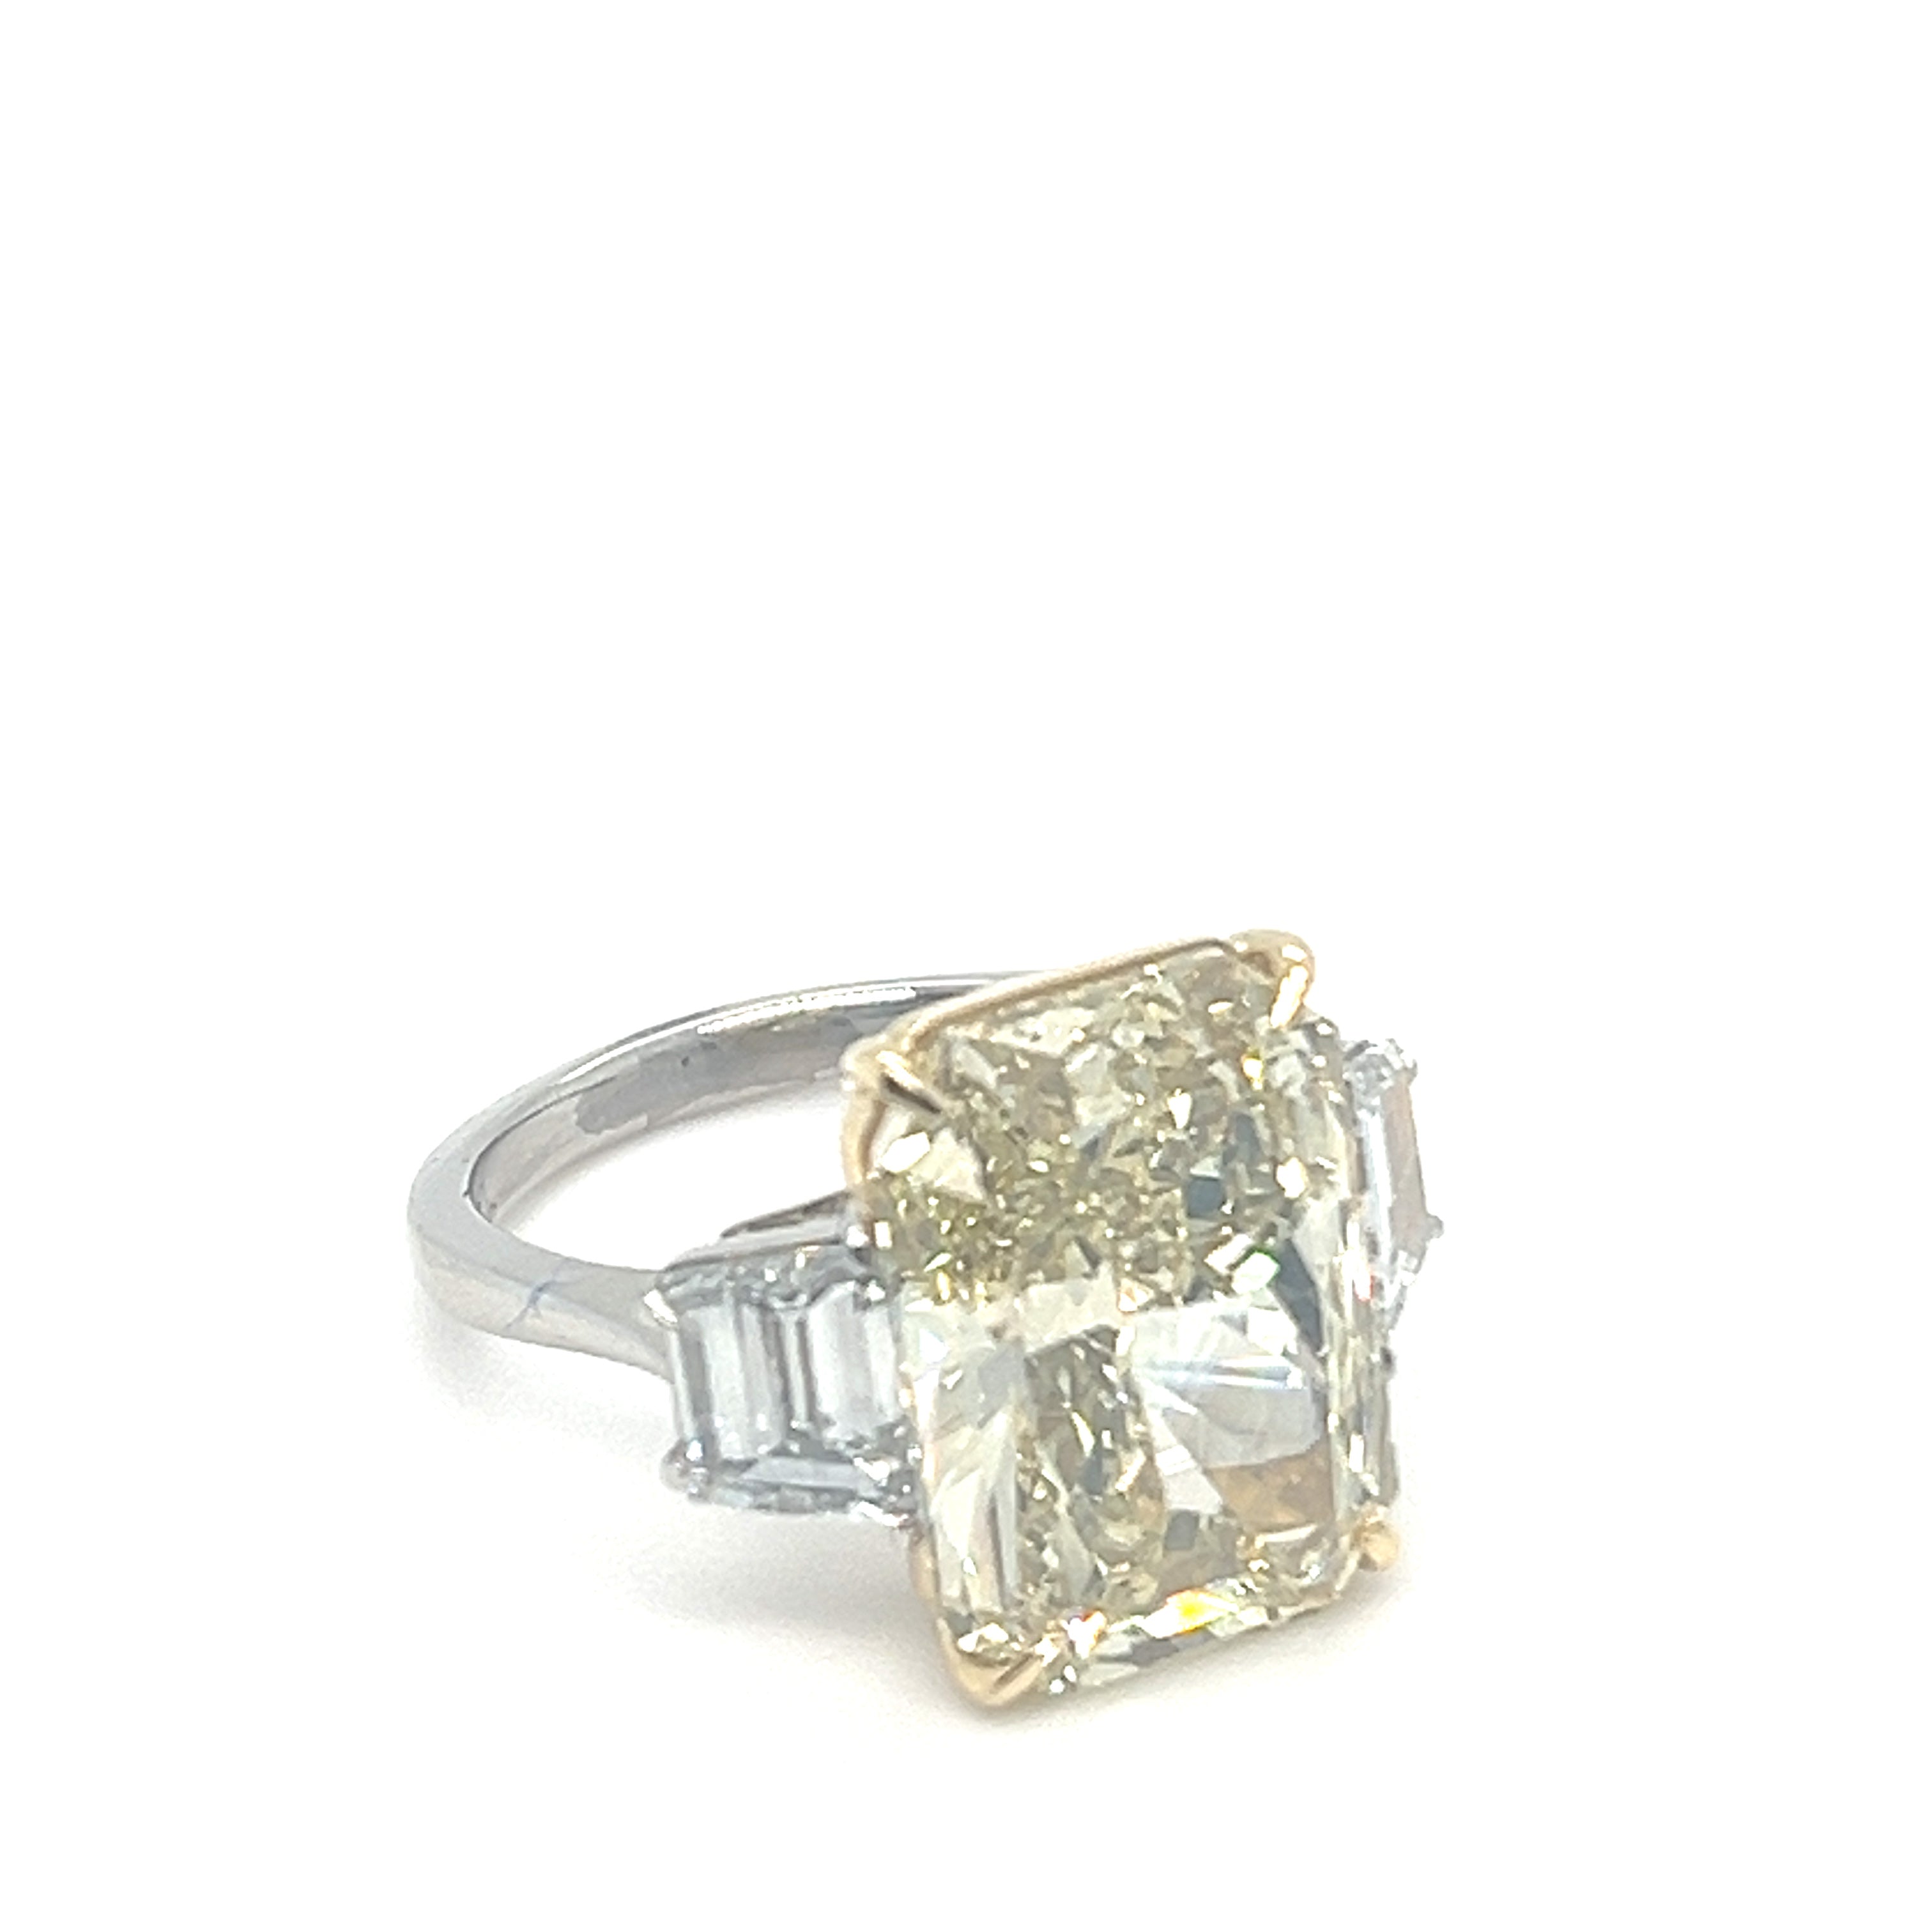 10.01CT CUS FY VVS2 GIA#6204775925//PLAT W TRAP SIDE STONES ENG RING